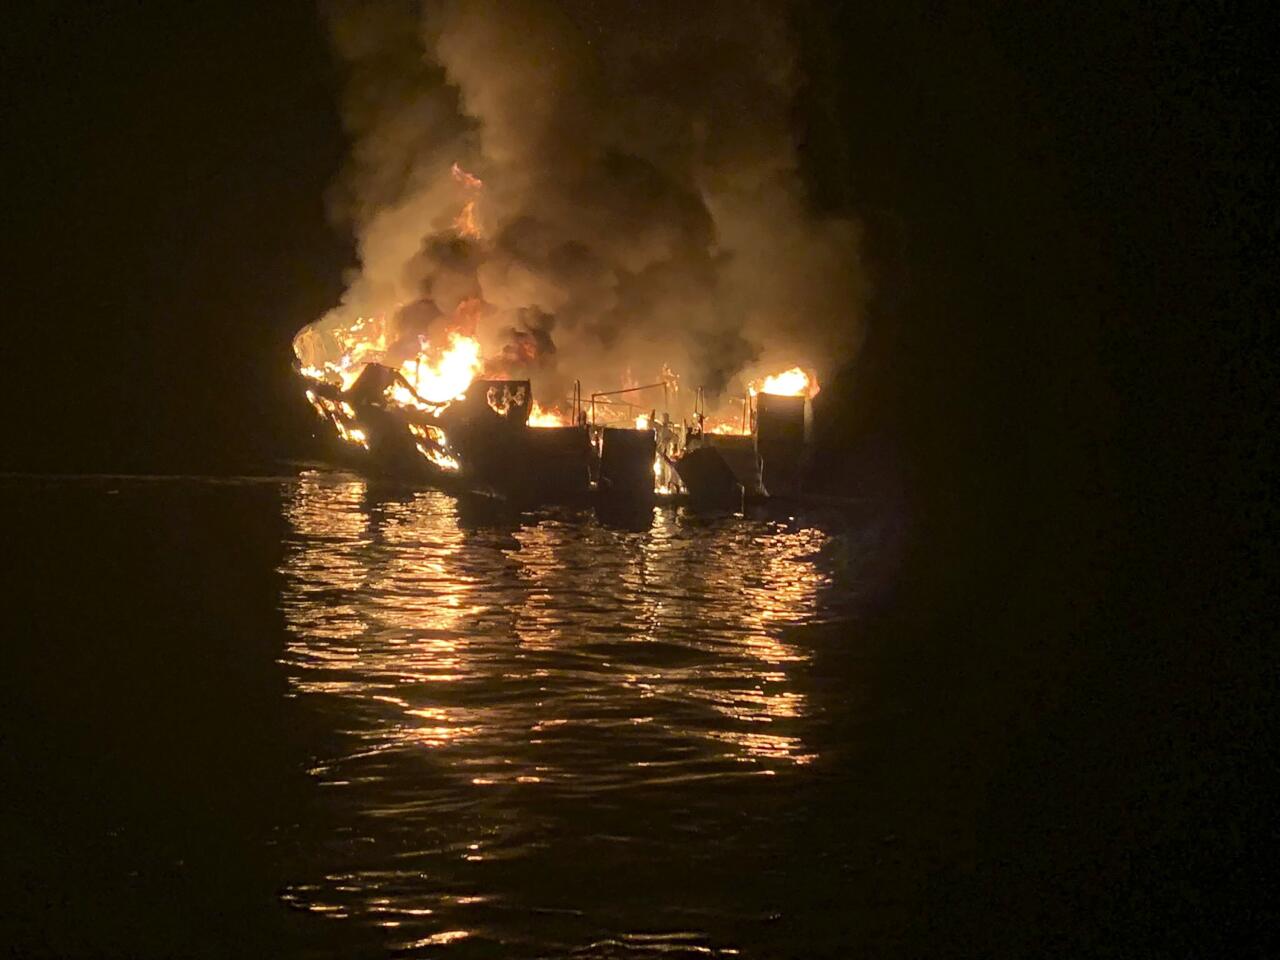 The dive boat Conception is engulfed in flames after a deadly fire broke out aboard the vessel off the Southern California Coast.